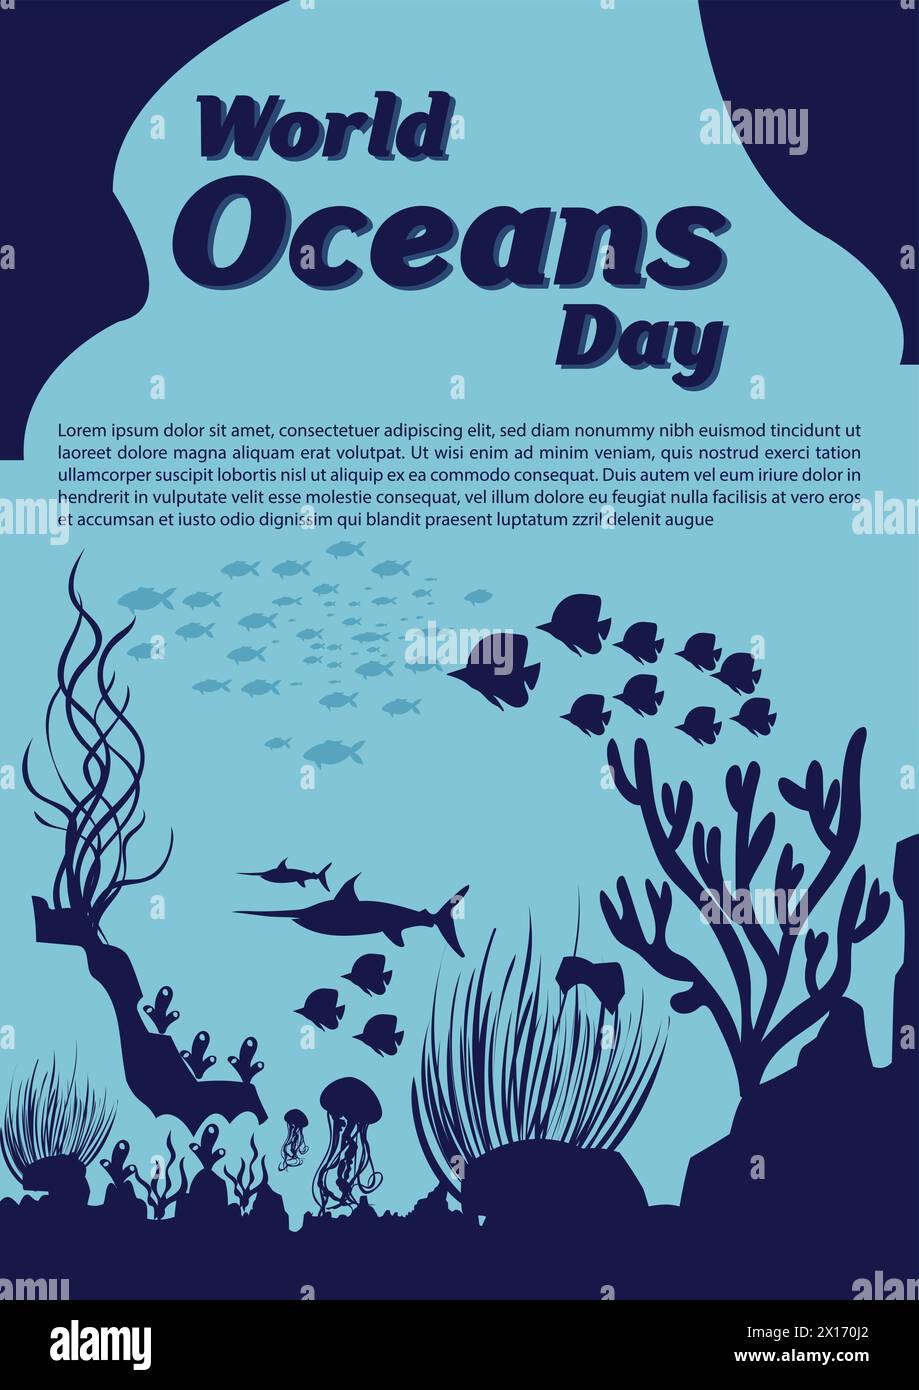 Let's save our oceans. World oceans day design with underwater ocean, dolphin, shark, coral, sea plants, stingray and turtle. Stock Vector